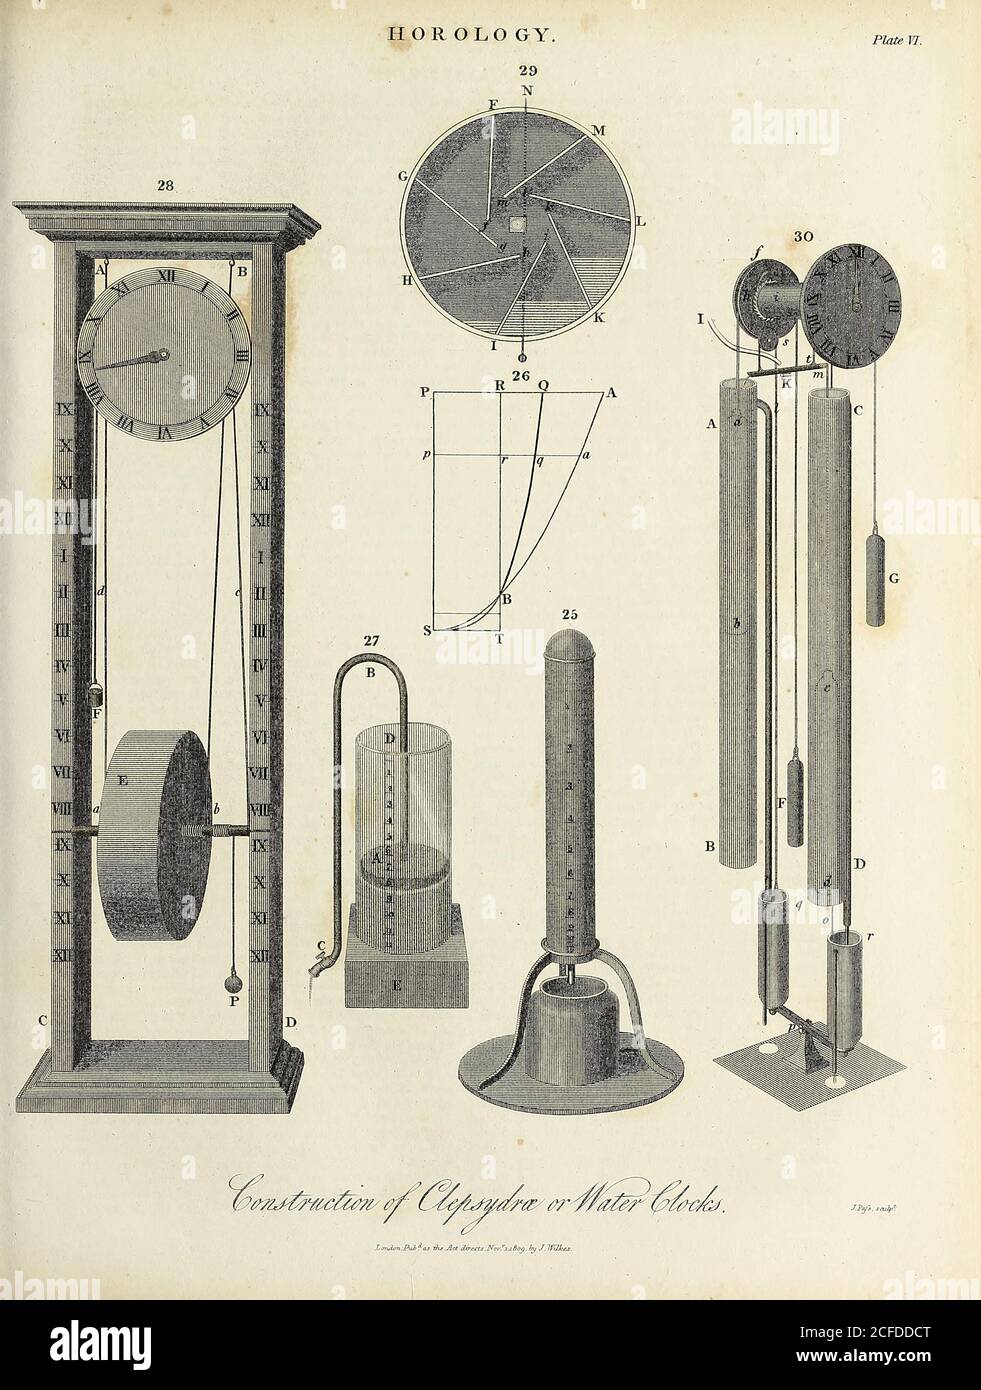 Construction of clepsydra [water clock]. Horology [study of the measurement  of time. Clocks, watches, clockwork, sundials, hourglasses, clepsydras,  timers, time recorders, marine chronometers]. Copperplate engraving By J.  Pafs From the Encyclopaedia ...